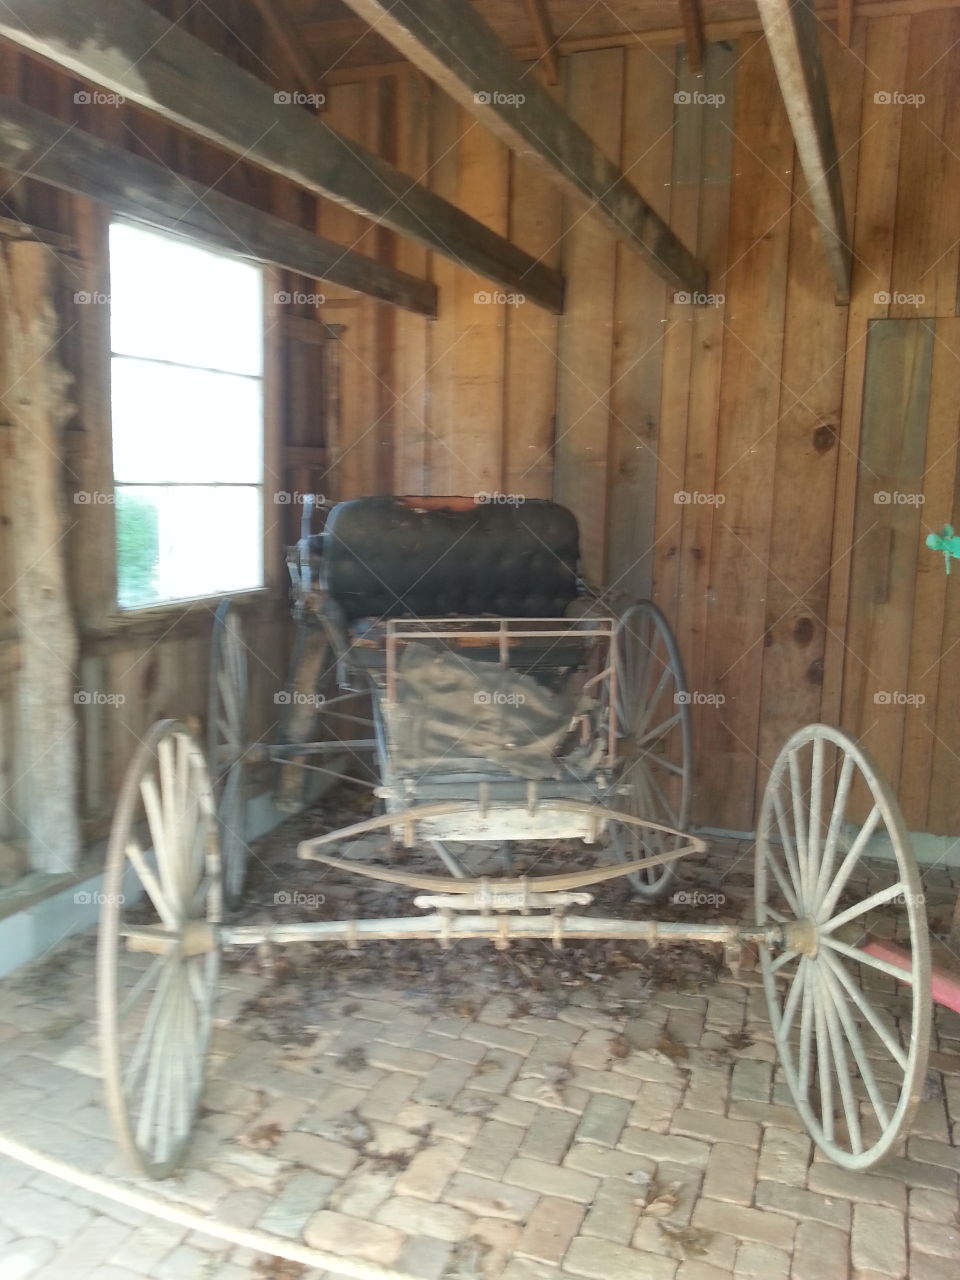 No Person, Carriage, Cart, Wagon, Wood